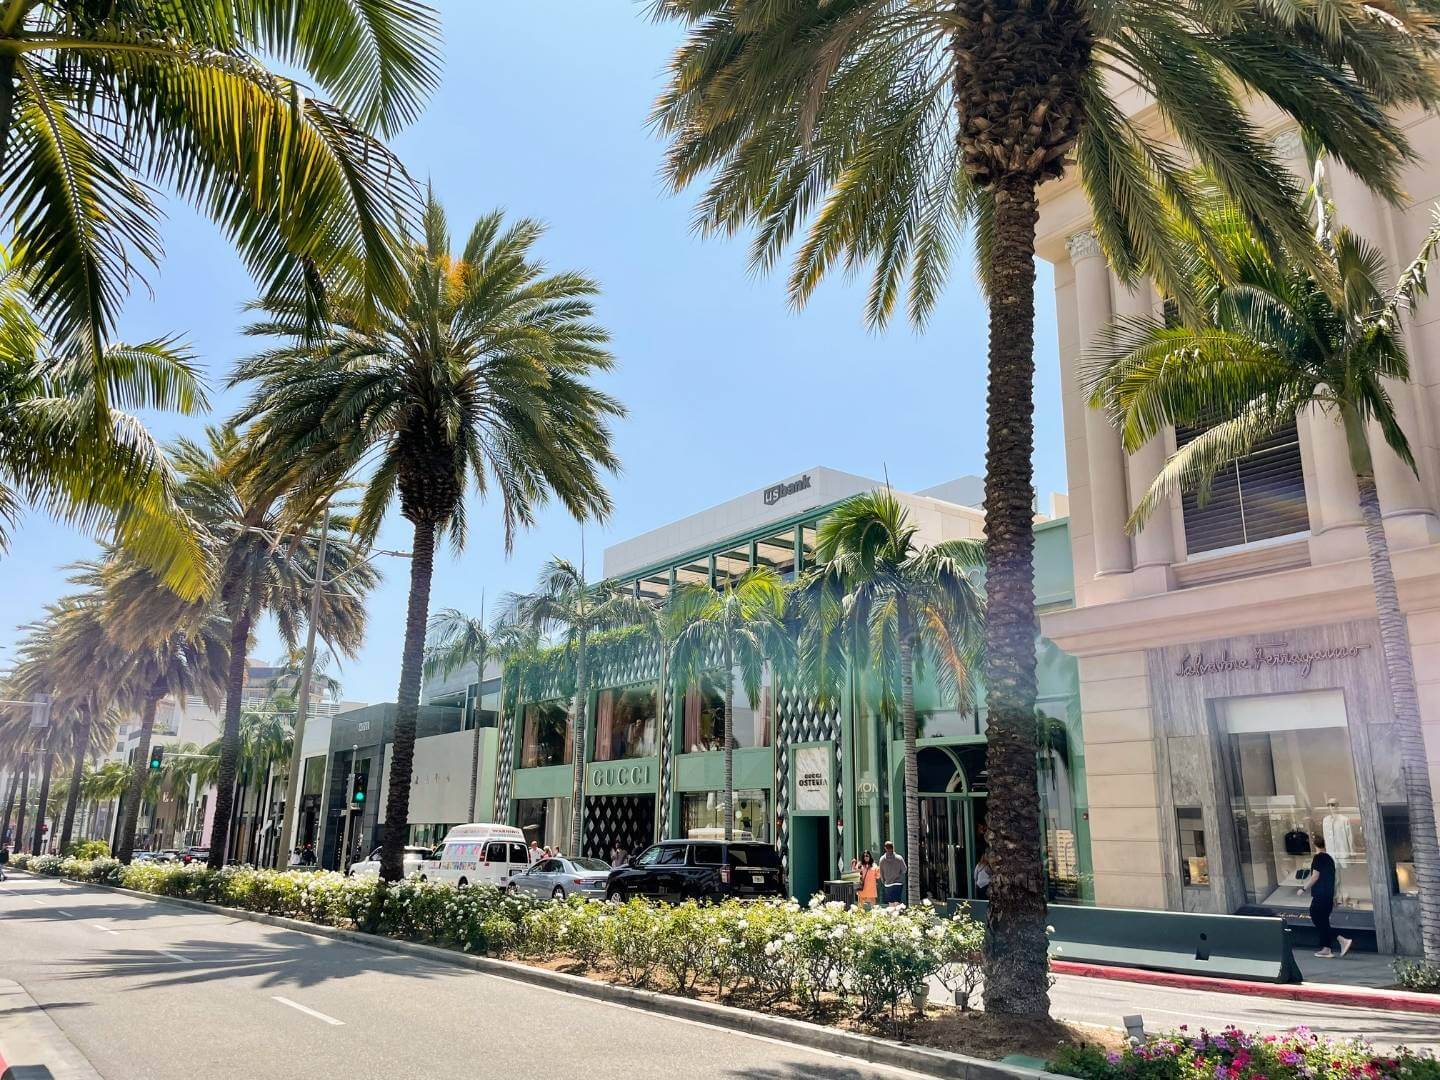 Explore Luxury Shopping in Beverly Hills